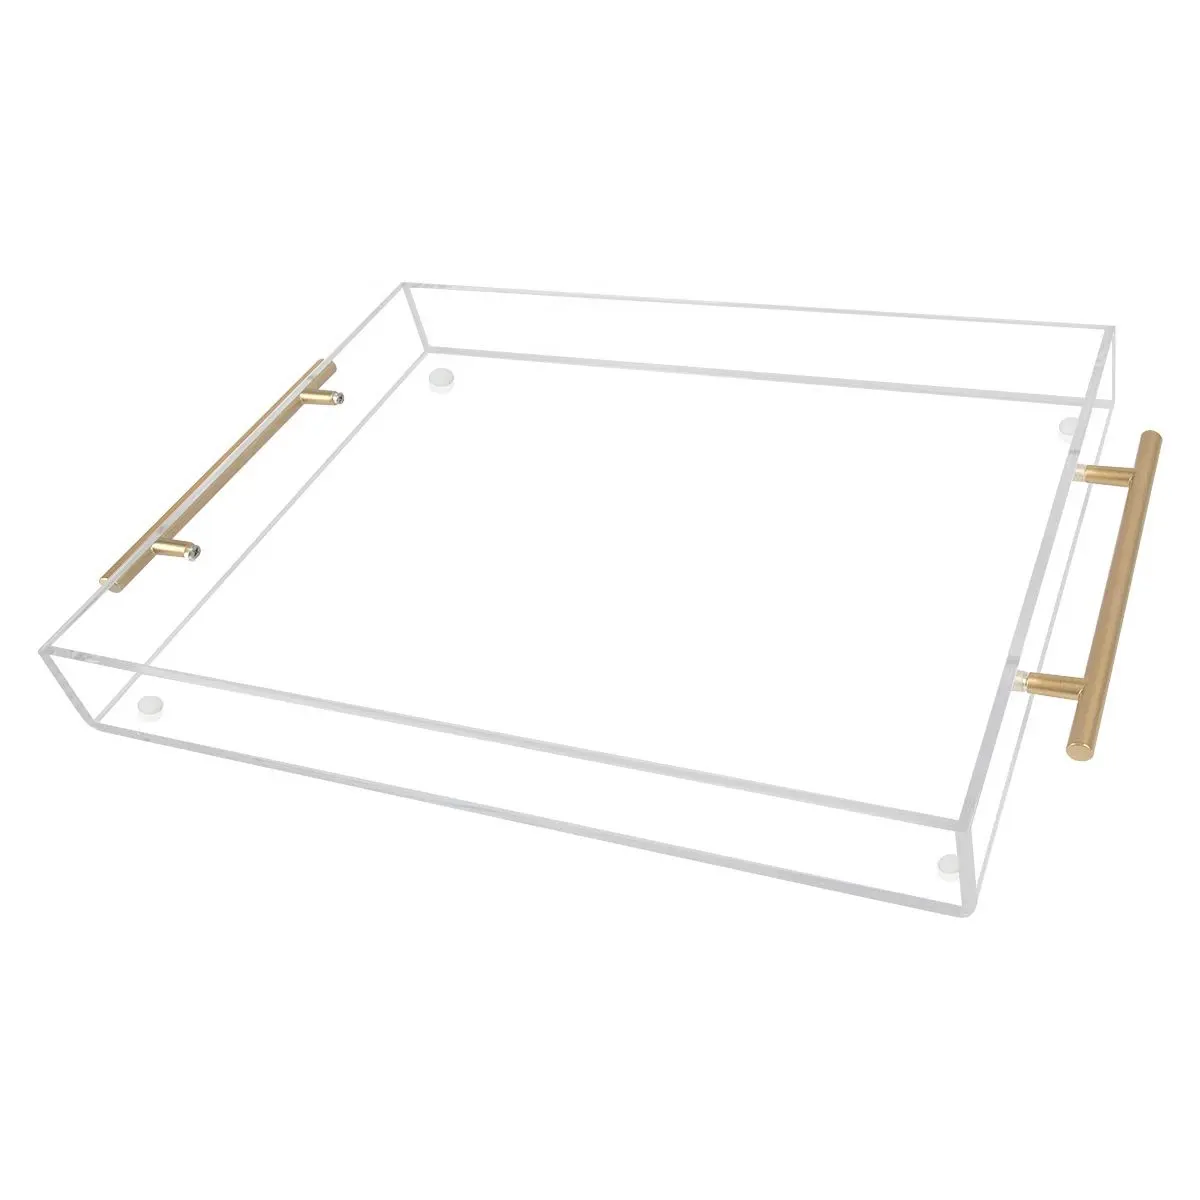 20x12 Inch Party Home Shop Serving Tray Wholesale Clear Stacking Lucite Tray Acrylic Trays With Handle